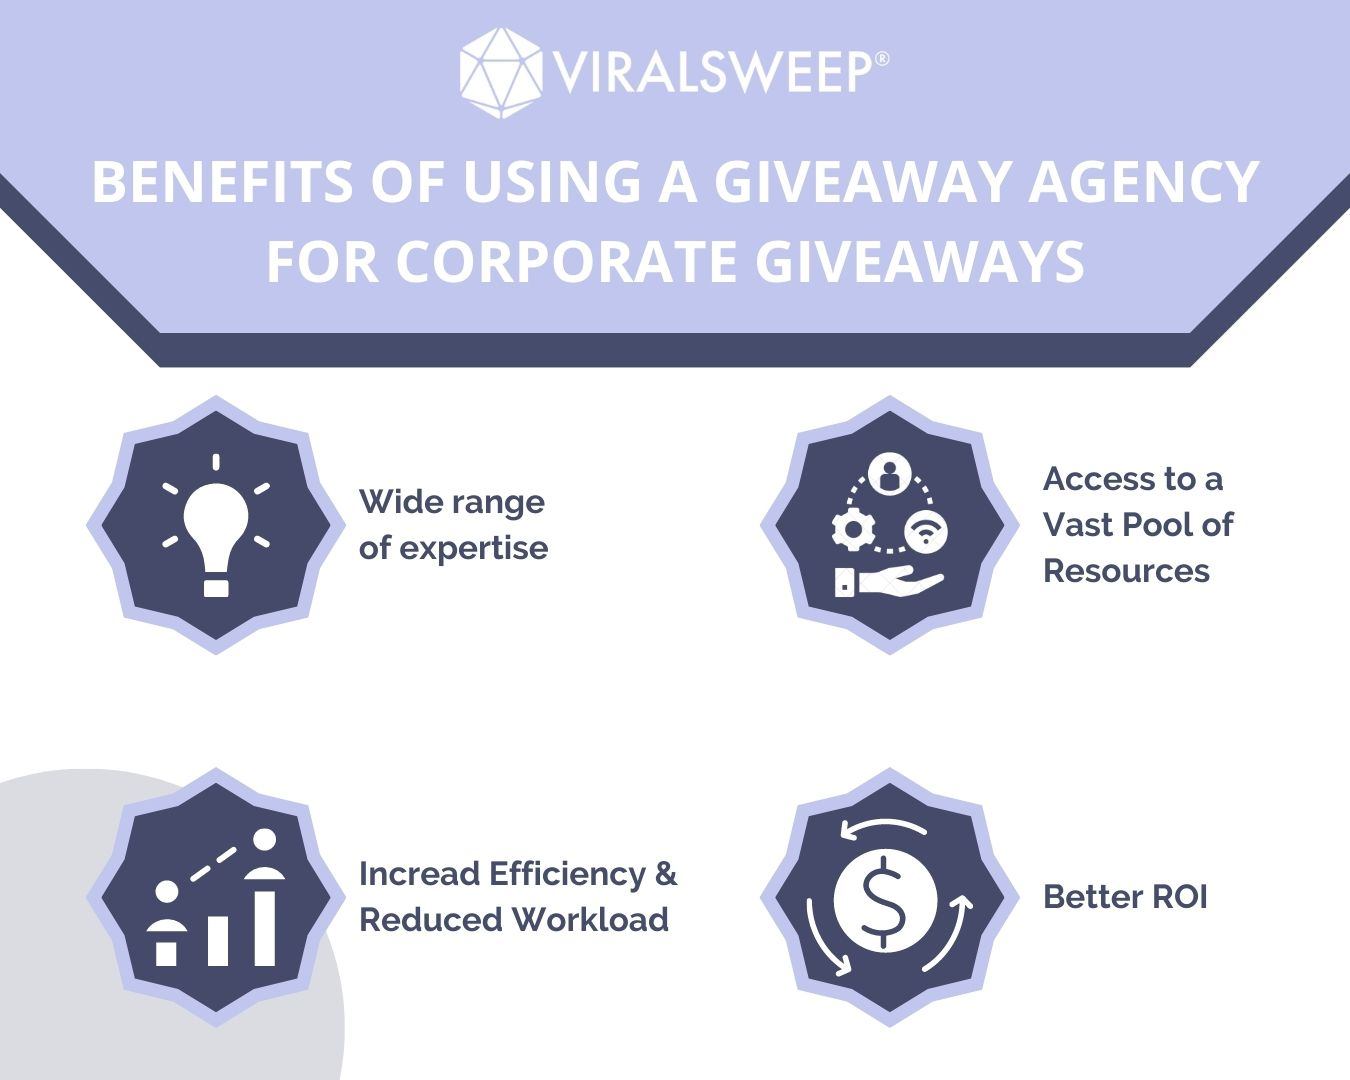 Benefits of using a giveaway agency for corporate giveaways